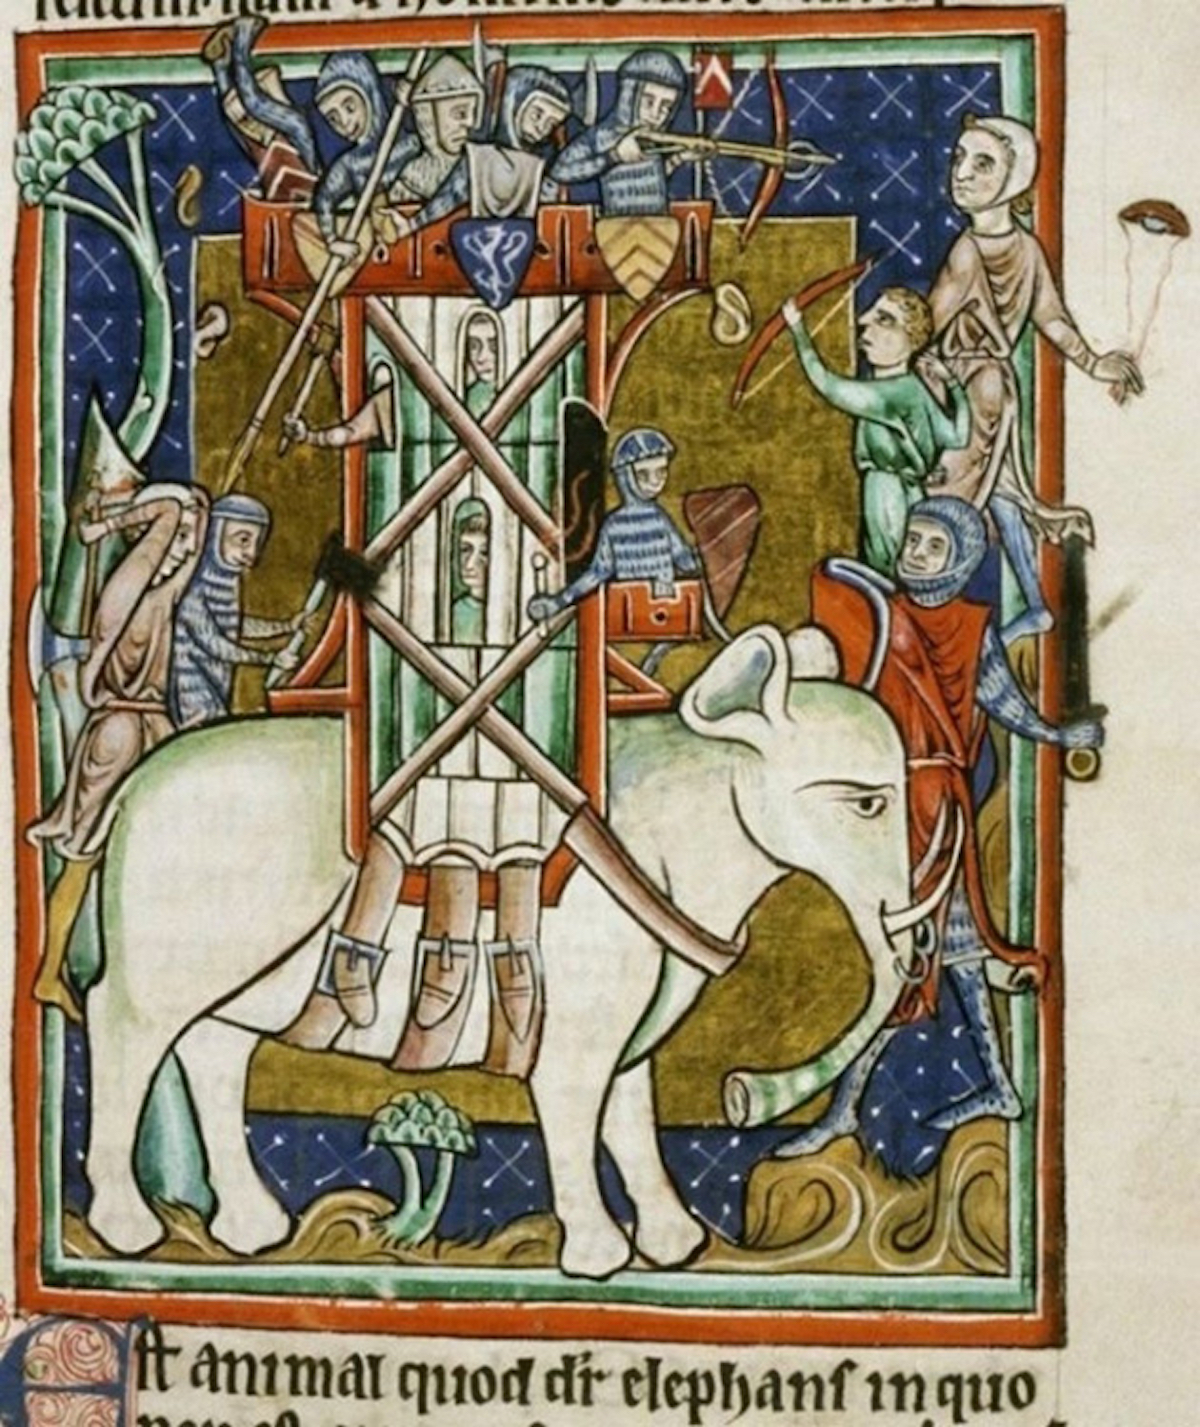 middle-ages-elephants11.jpg